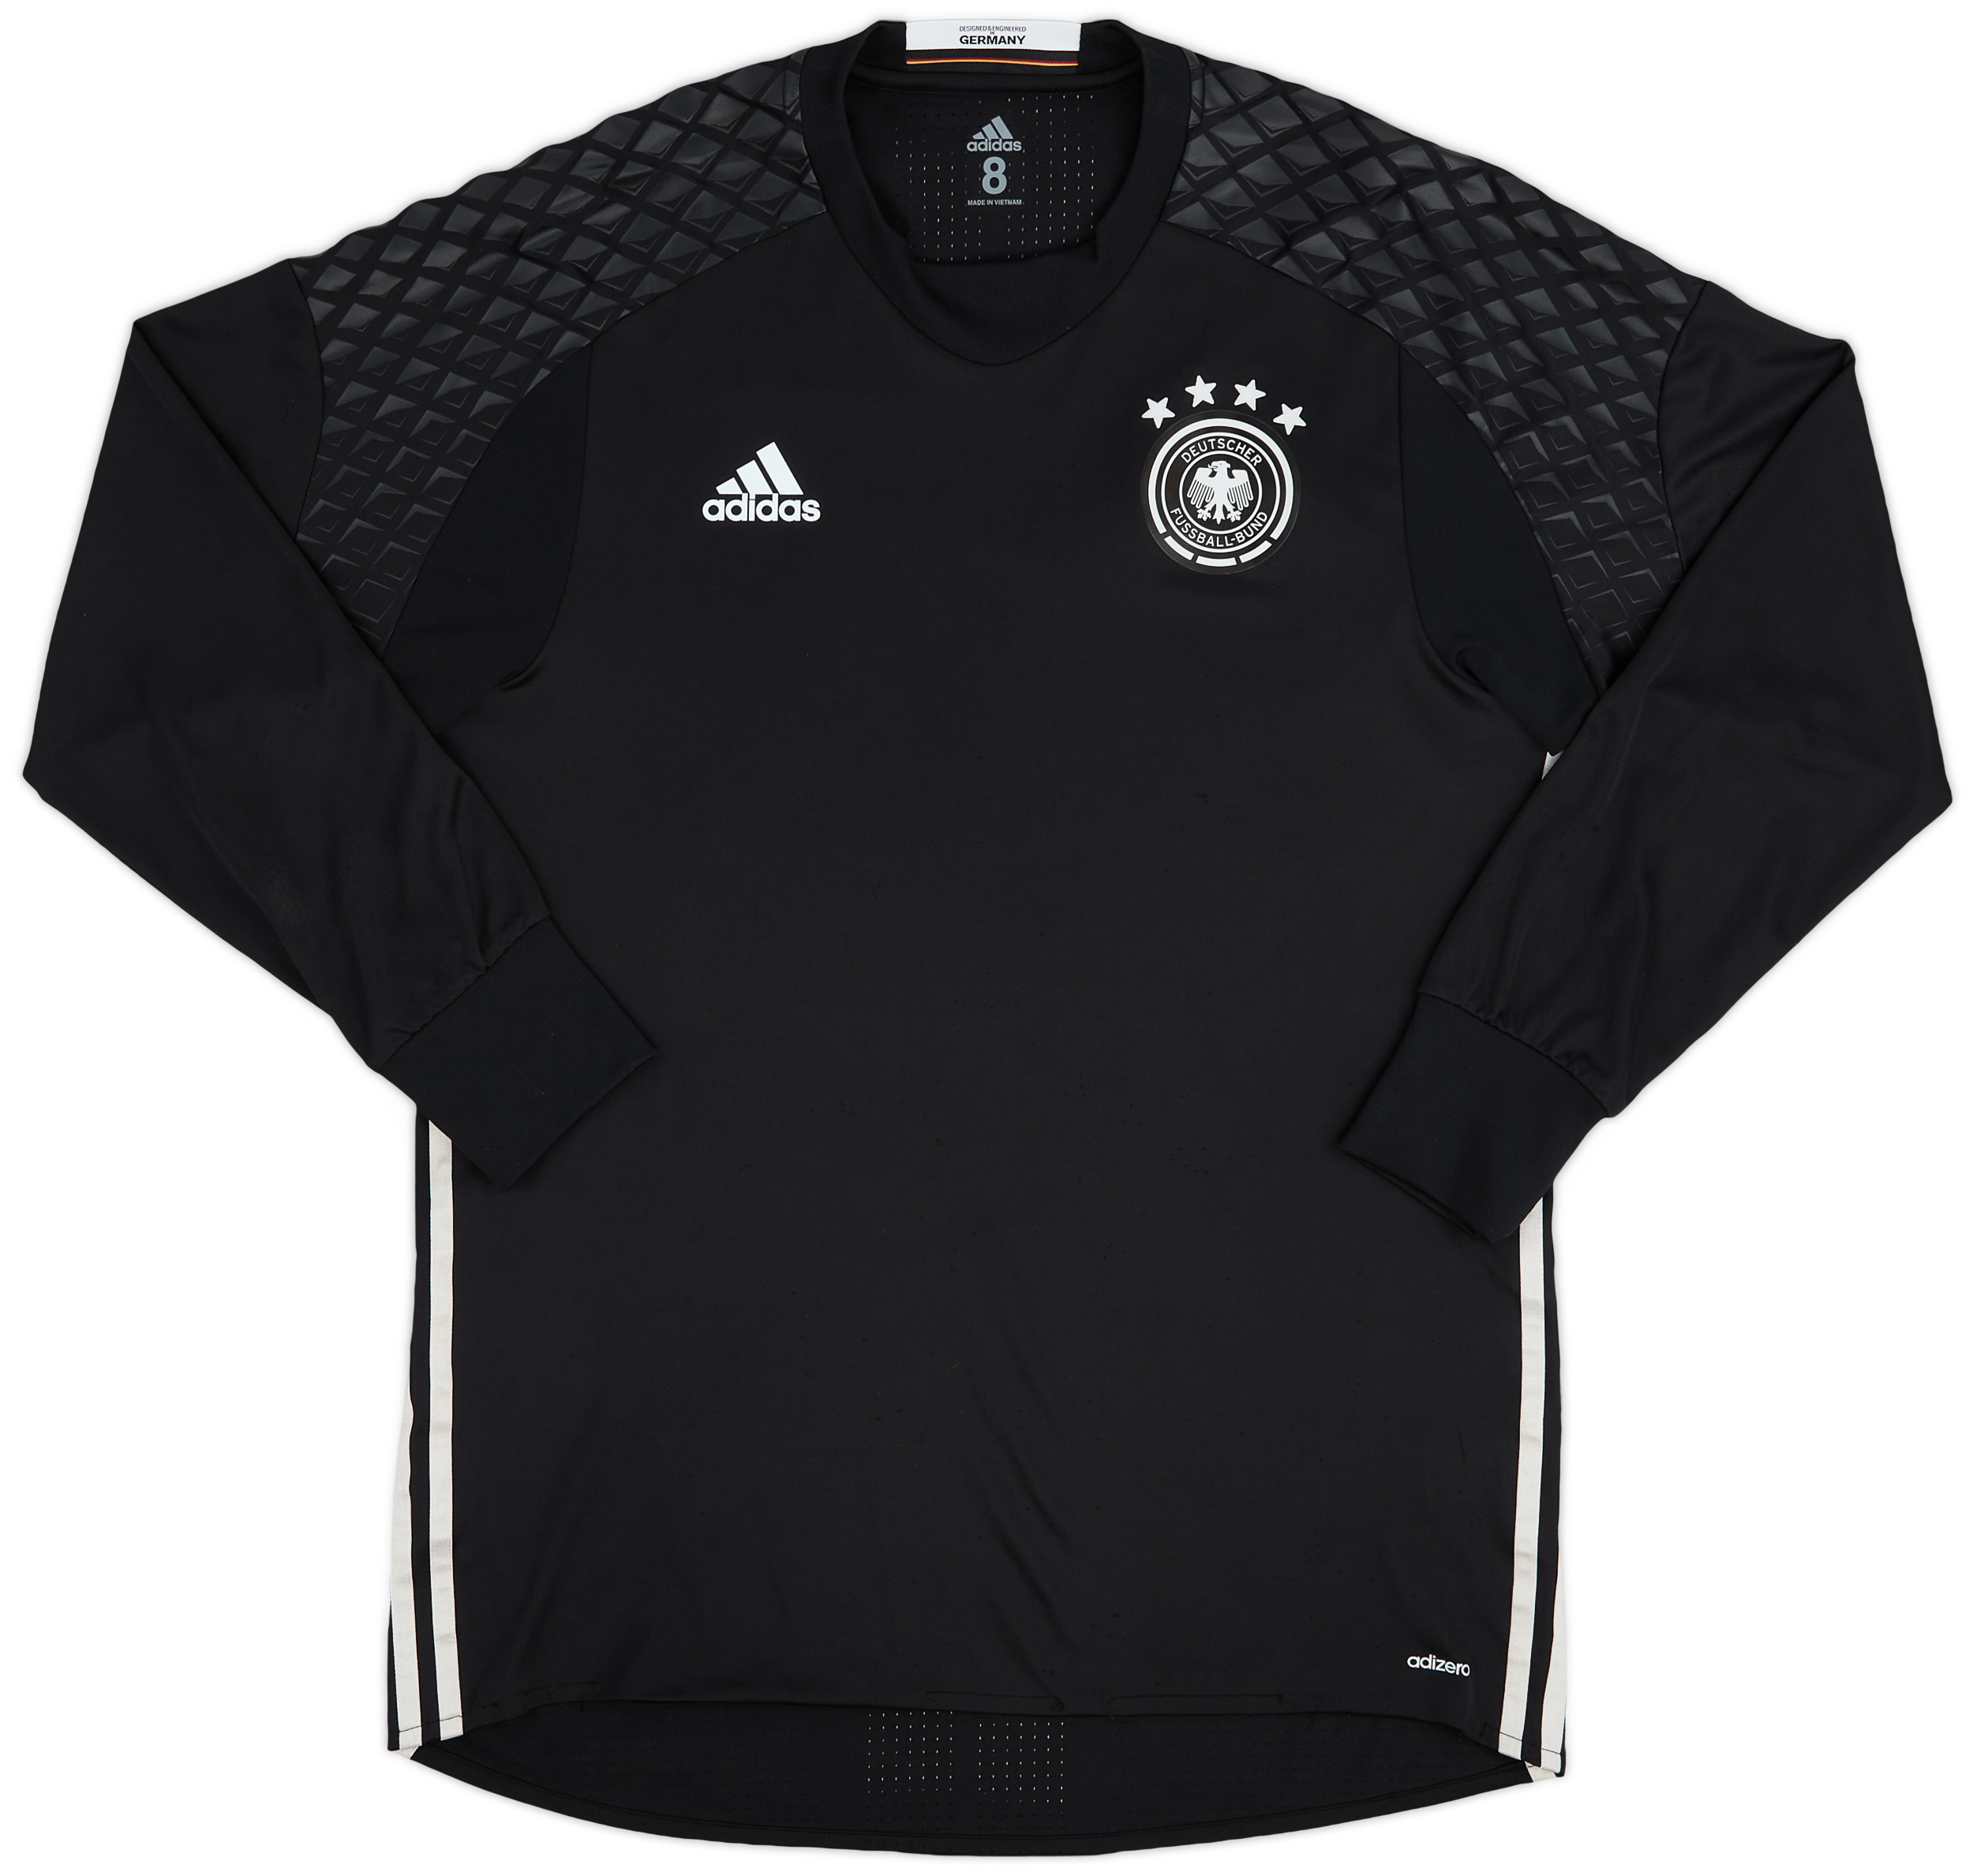 2015-17 Germany Player Issue GK Shirt - 9/10 - ()